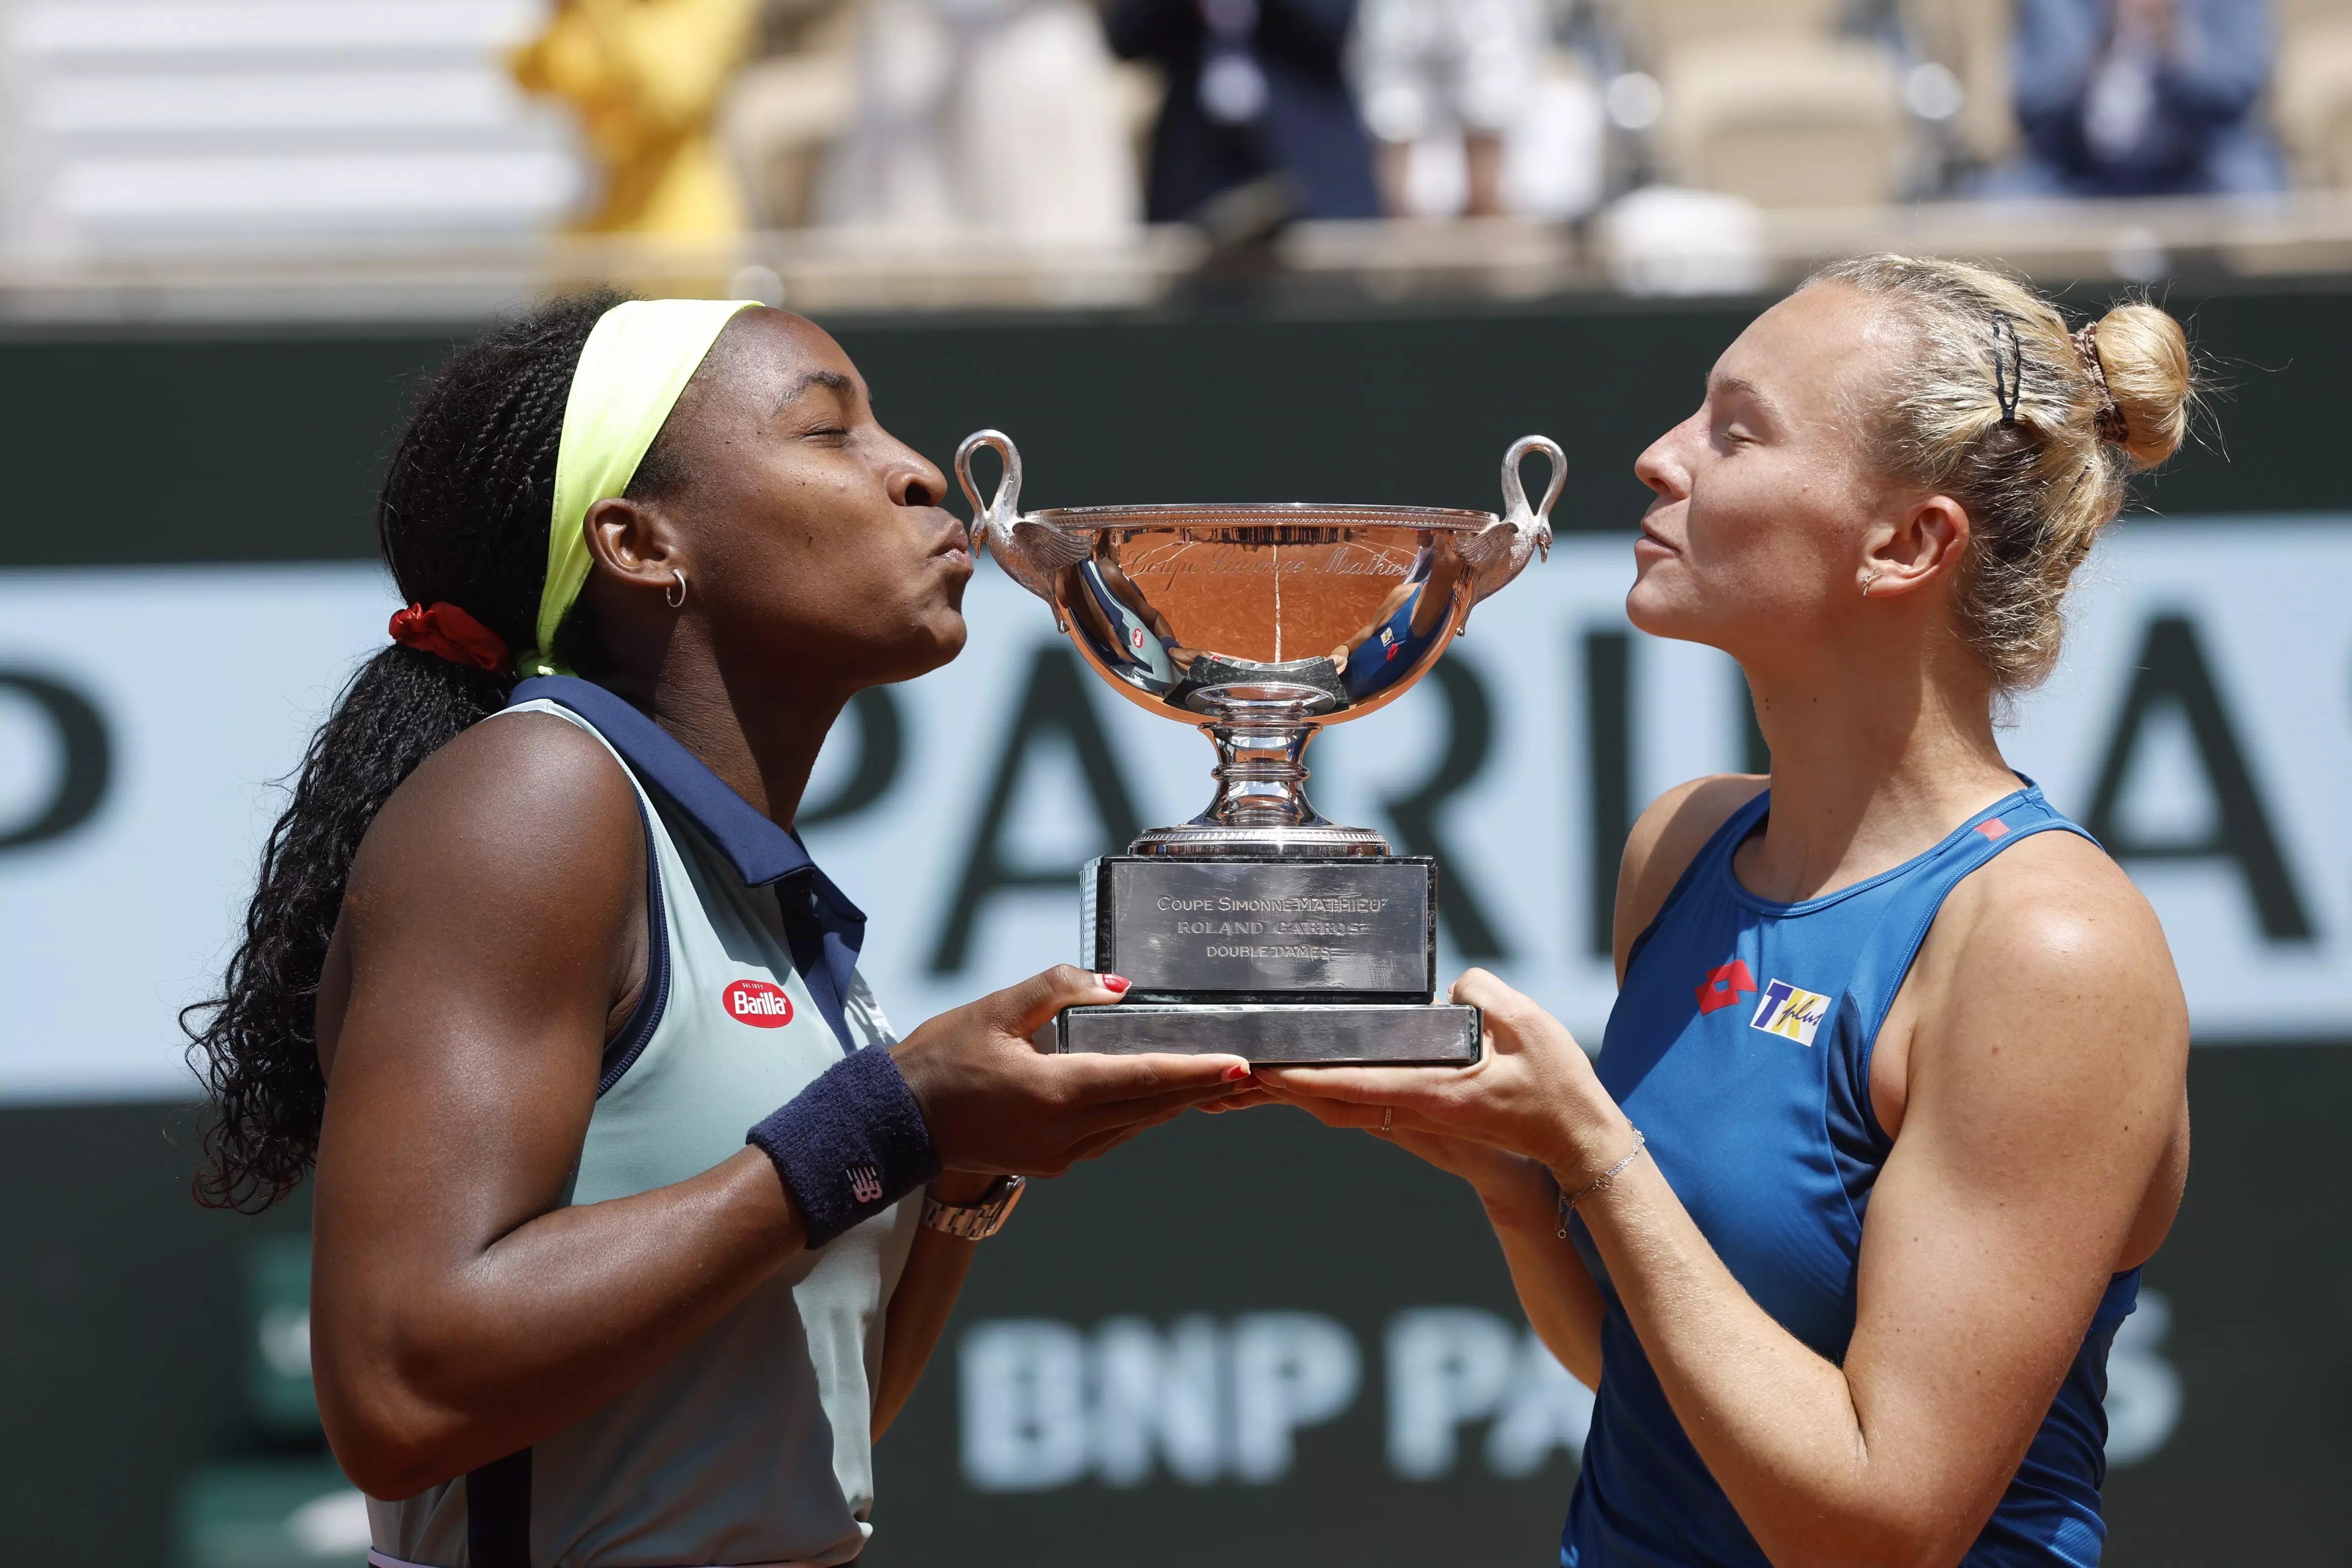 Coco Gauff wins her first Grand Slam doubles title at French Open